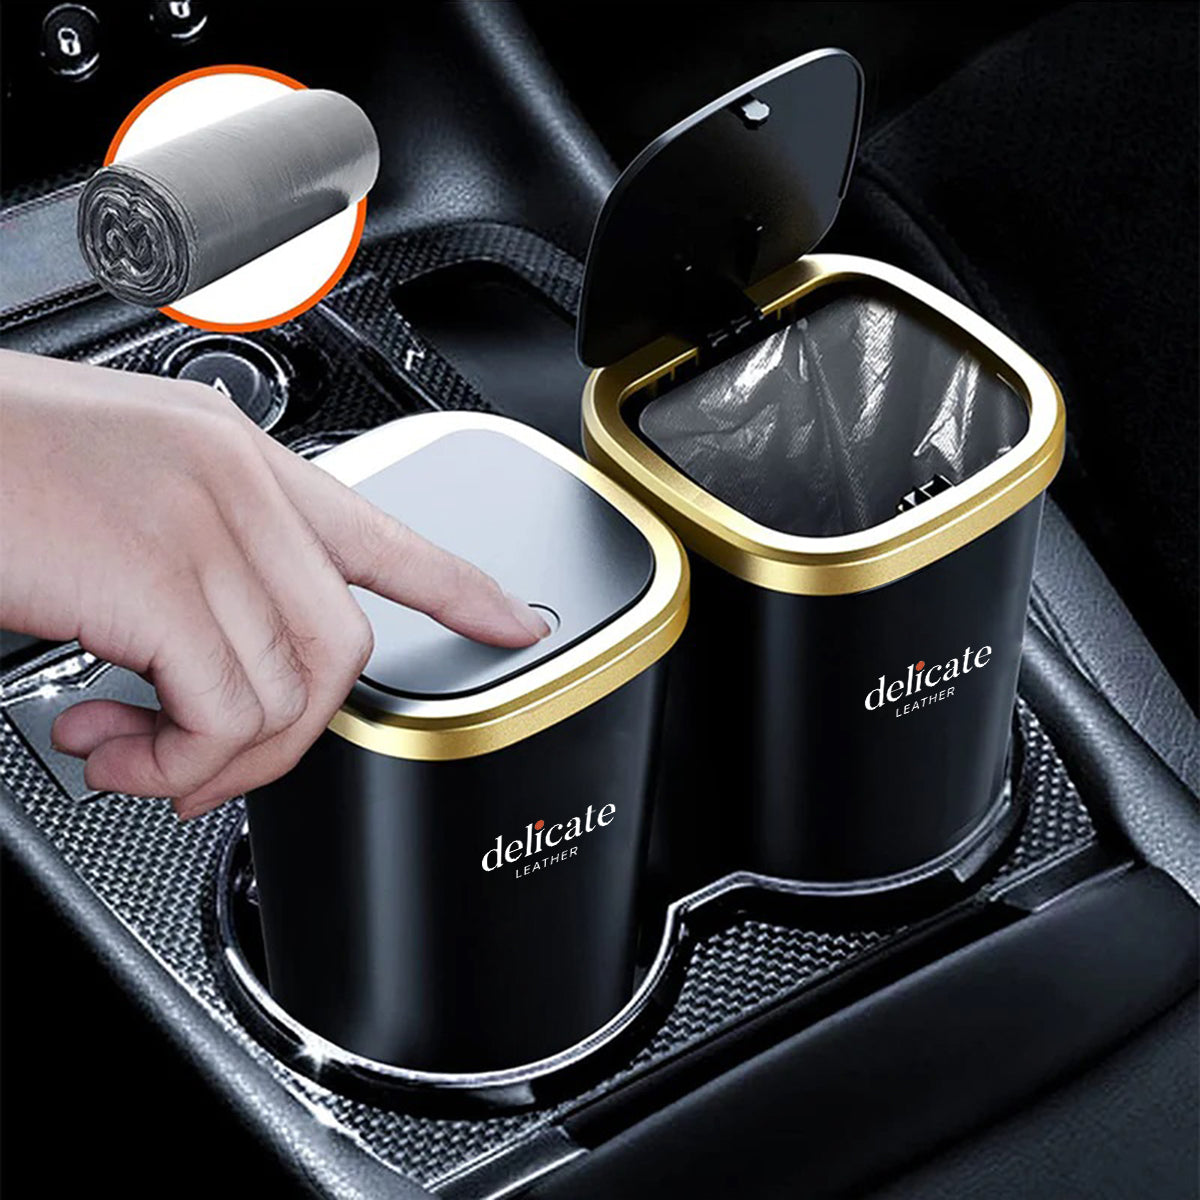 Car Trash Cans, Custom For Your Cars, Compact & Durable Car Accessories for Interior Use 2 Pack, Practical Car Organizers and Storage Cups with Pop-Up Open, Car Accessories PF11993 - Delicate Leather